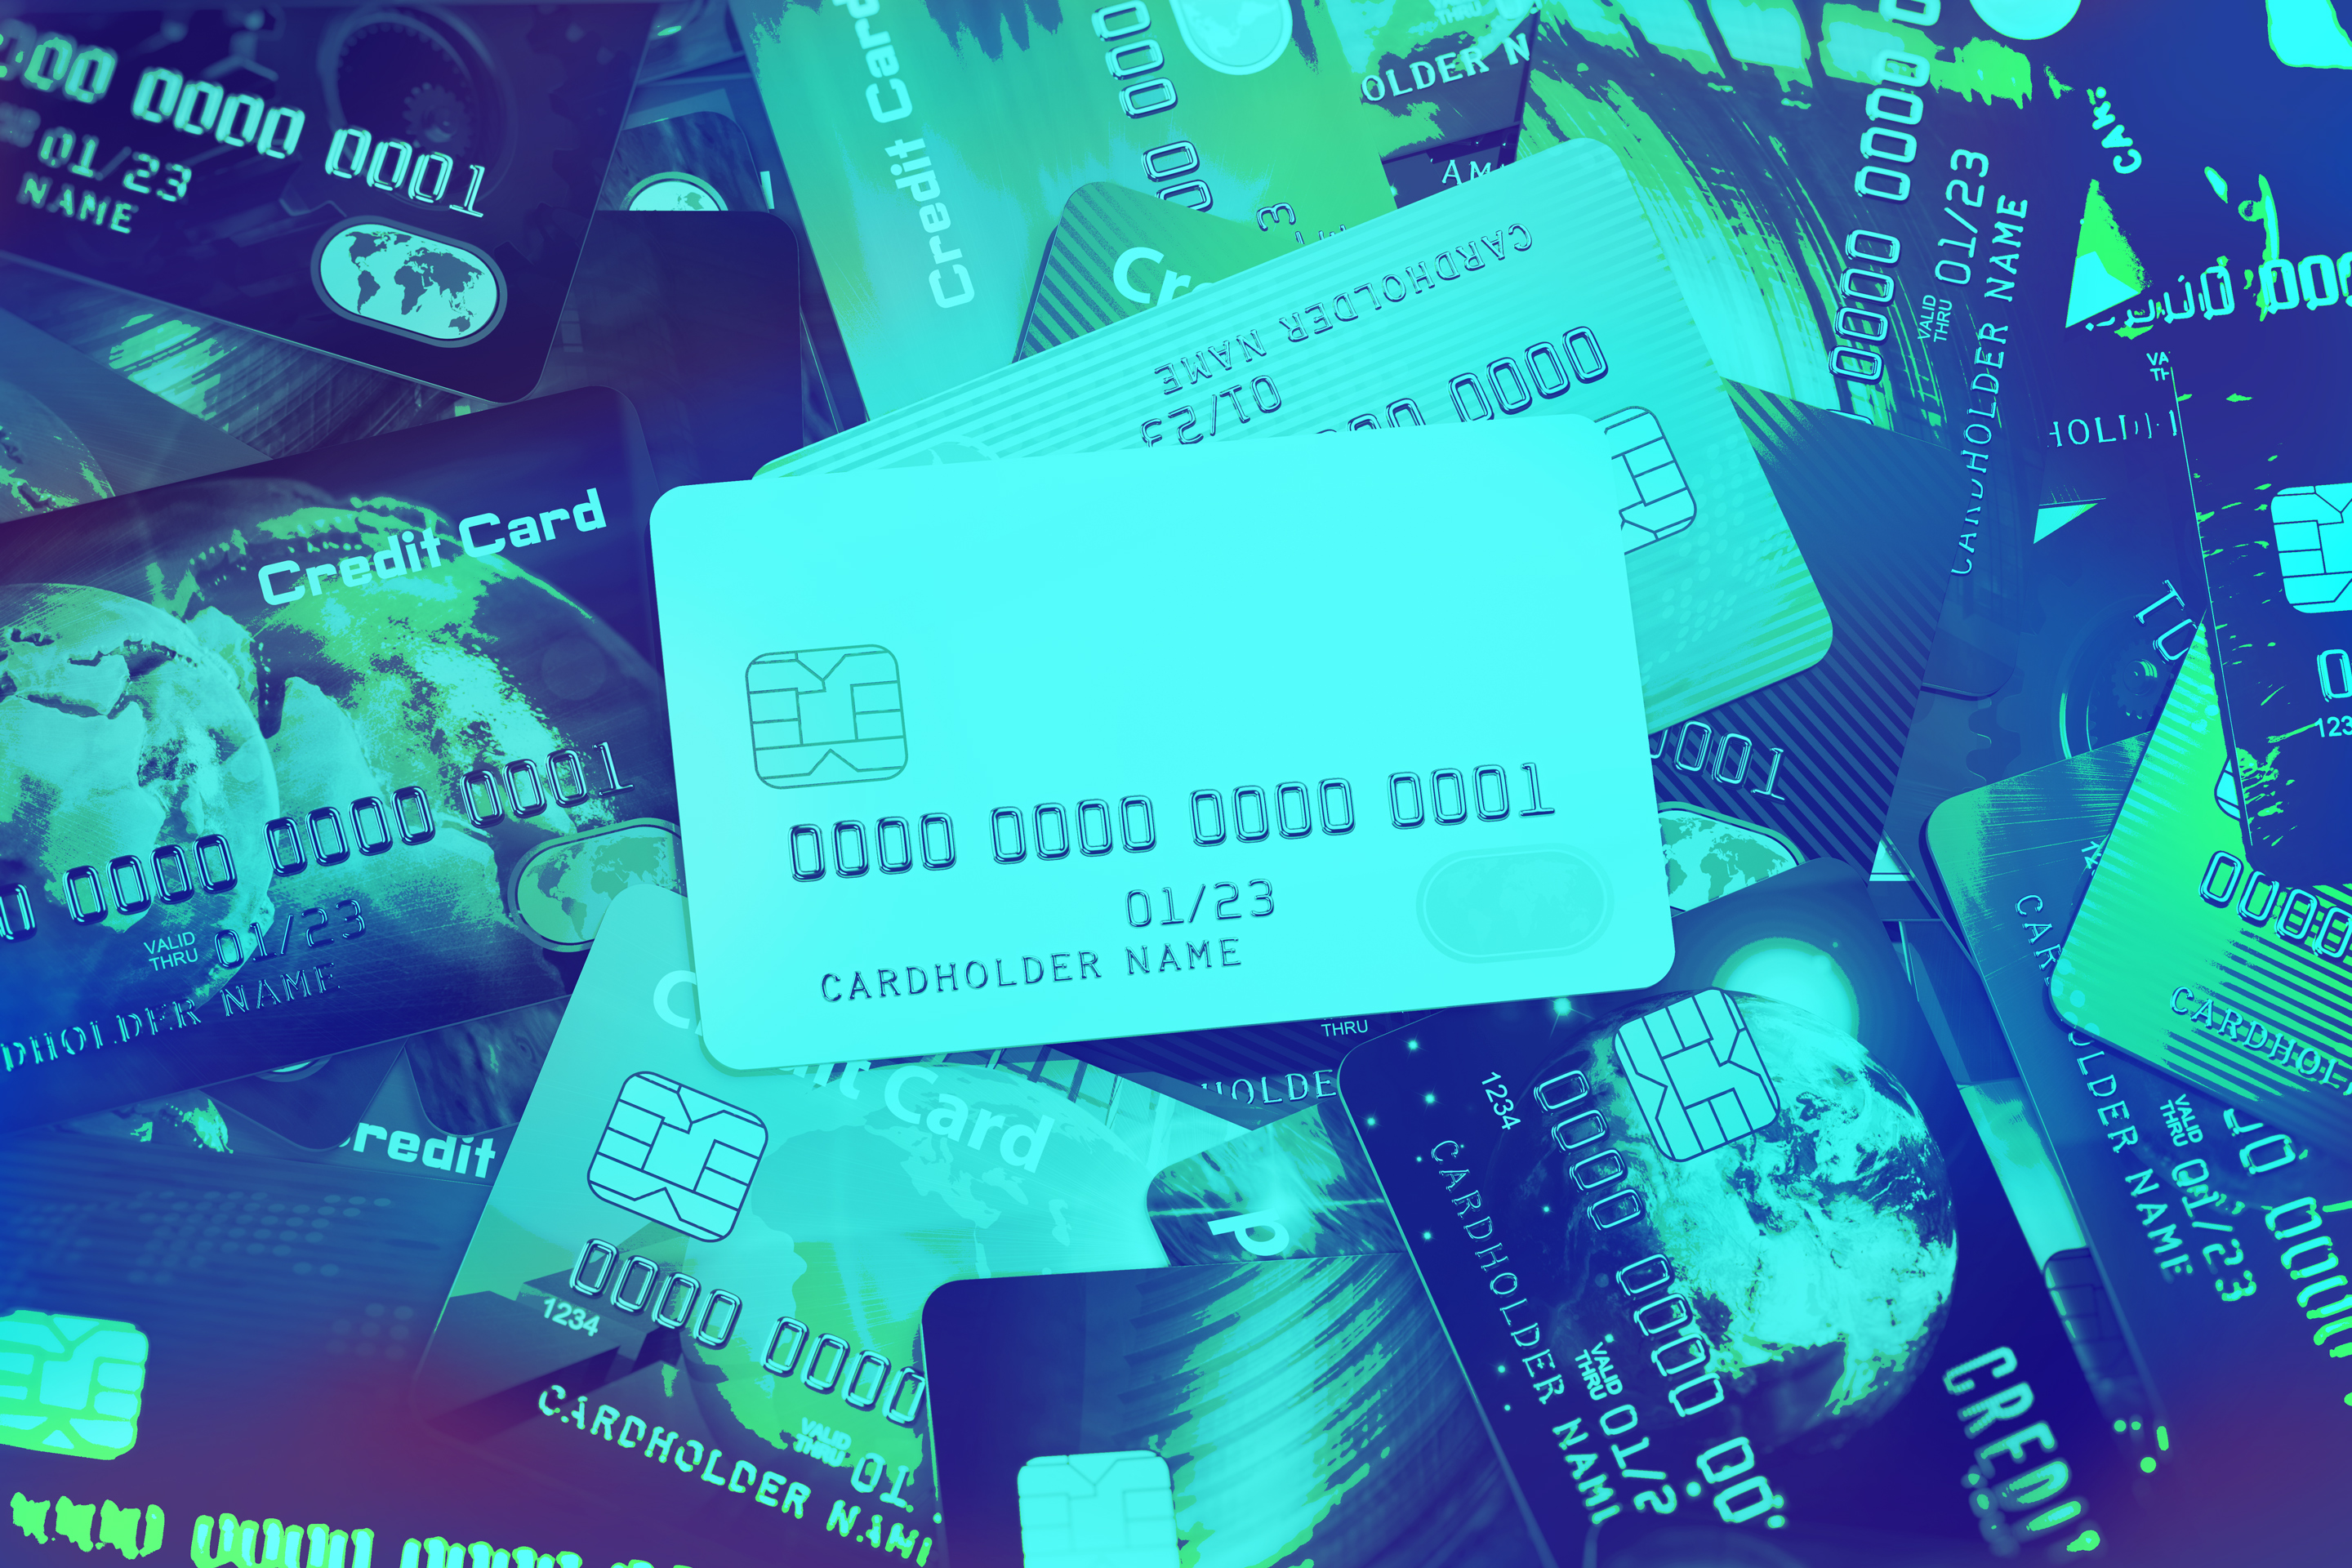 New Money Study: How the Pandemic Is Changing Americans' Credit Card Habits, From Spending to Paying Down Debt